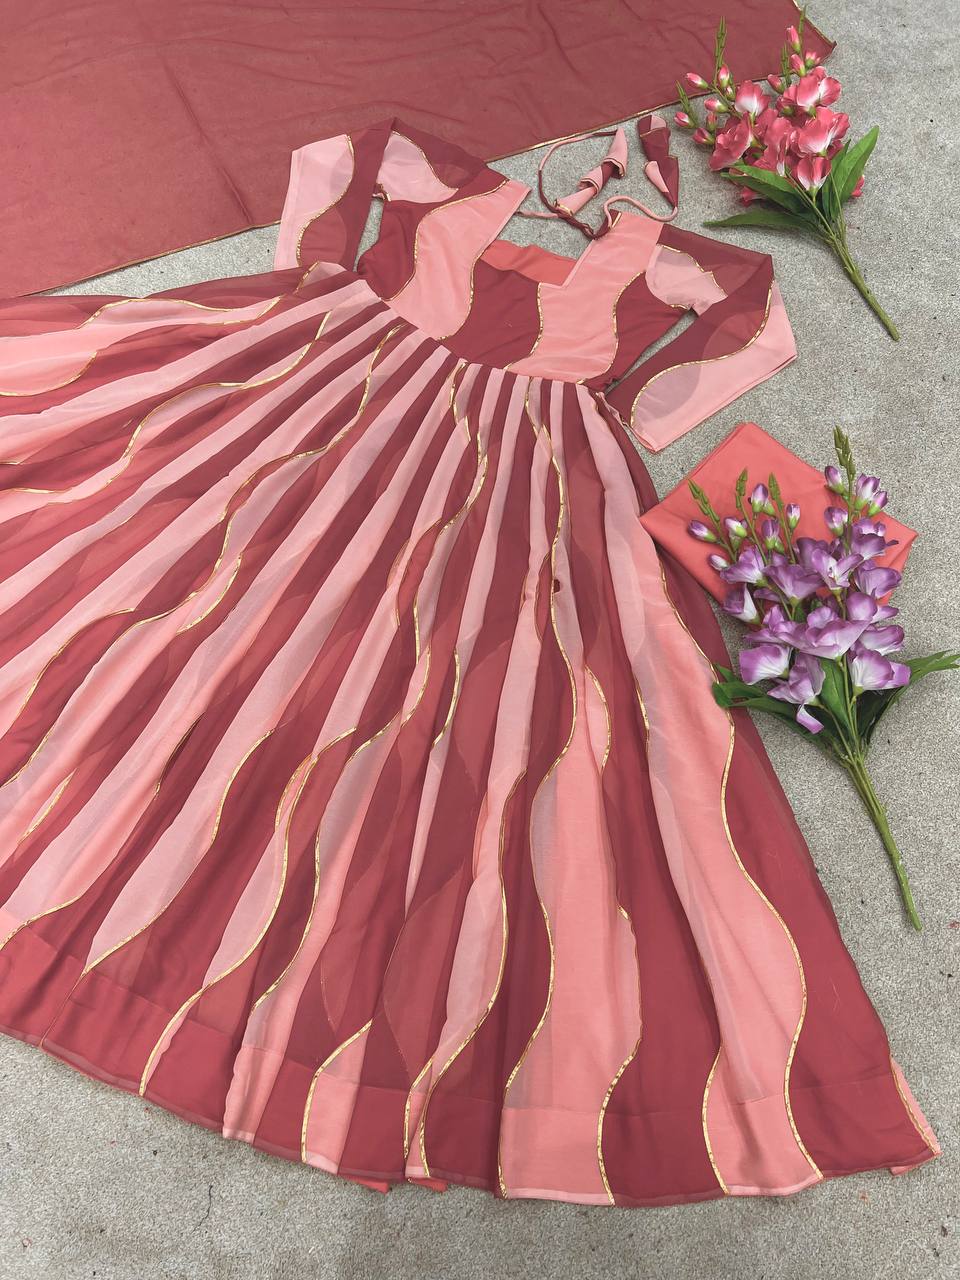 Glossy Peach Color Digital Print Gown